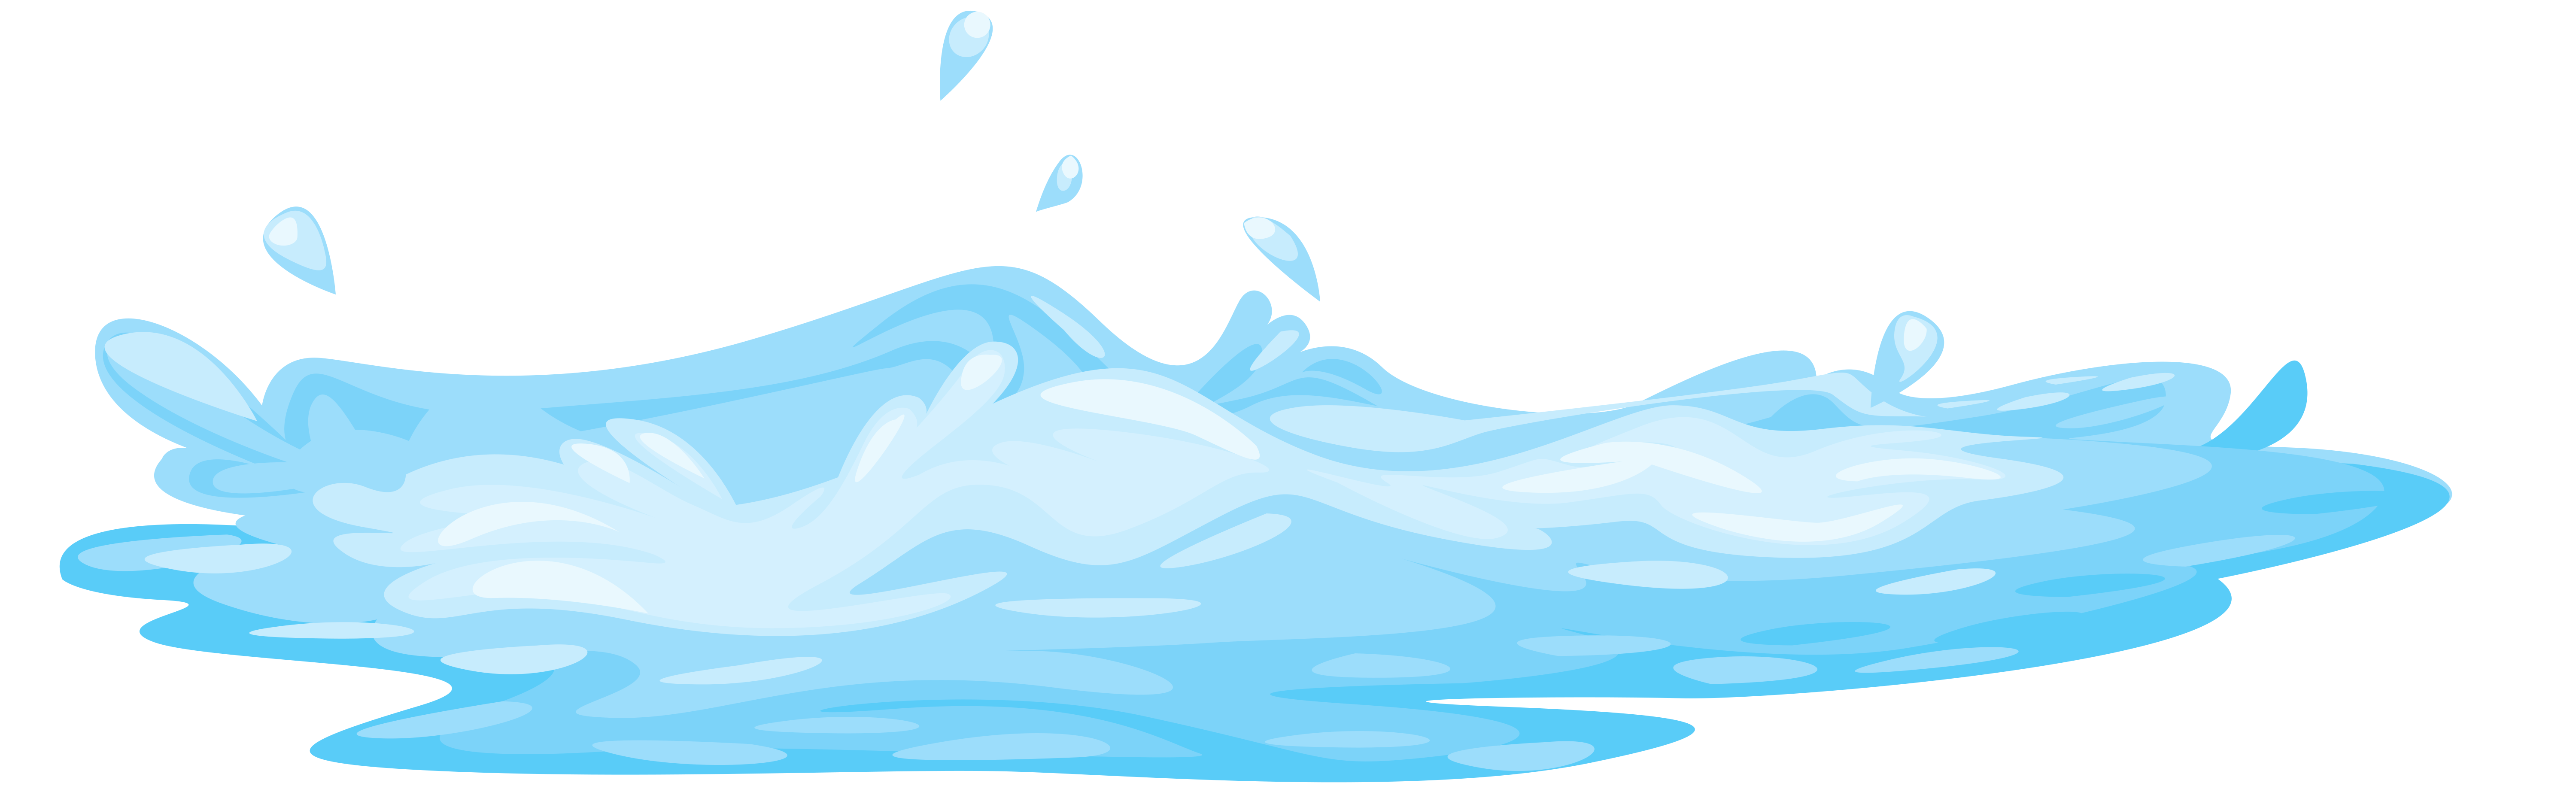 Waves clipart wipeout. Puddle transparent png gallery